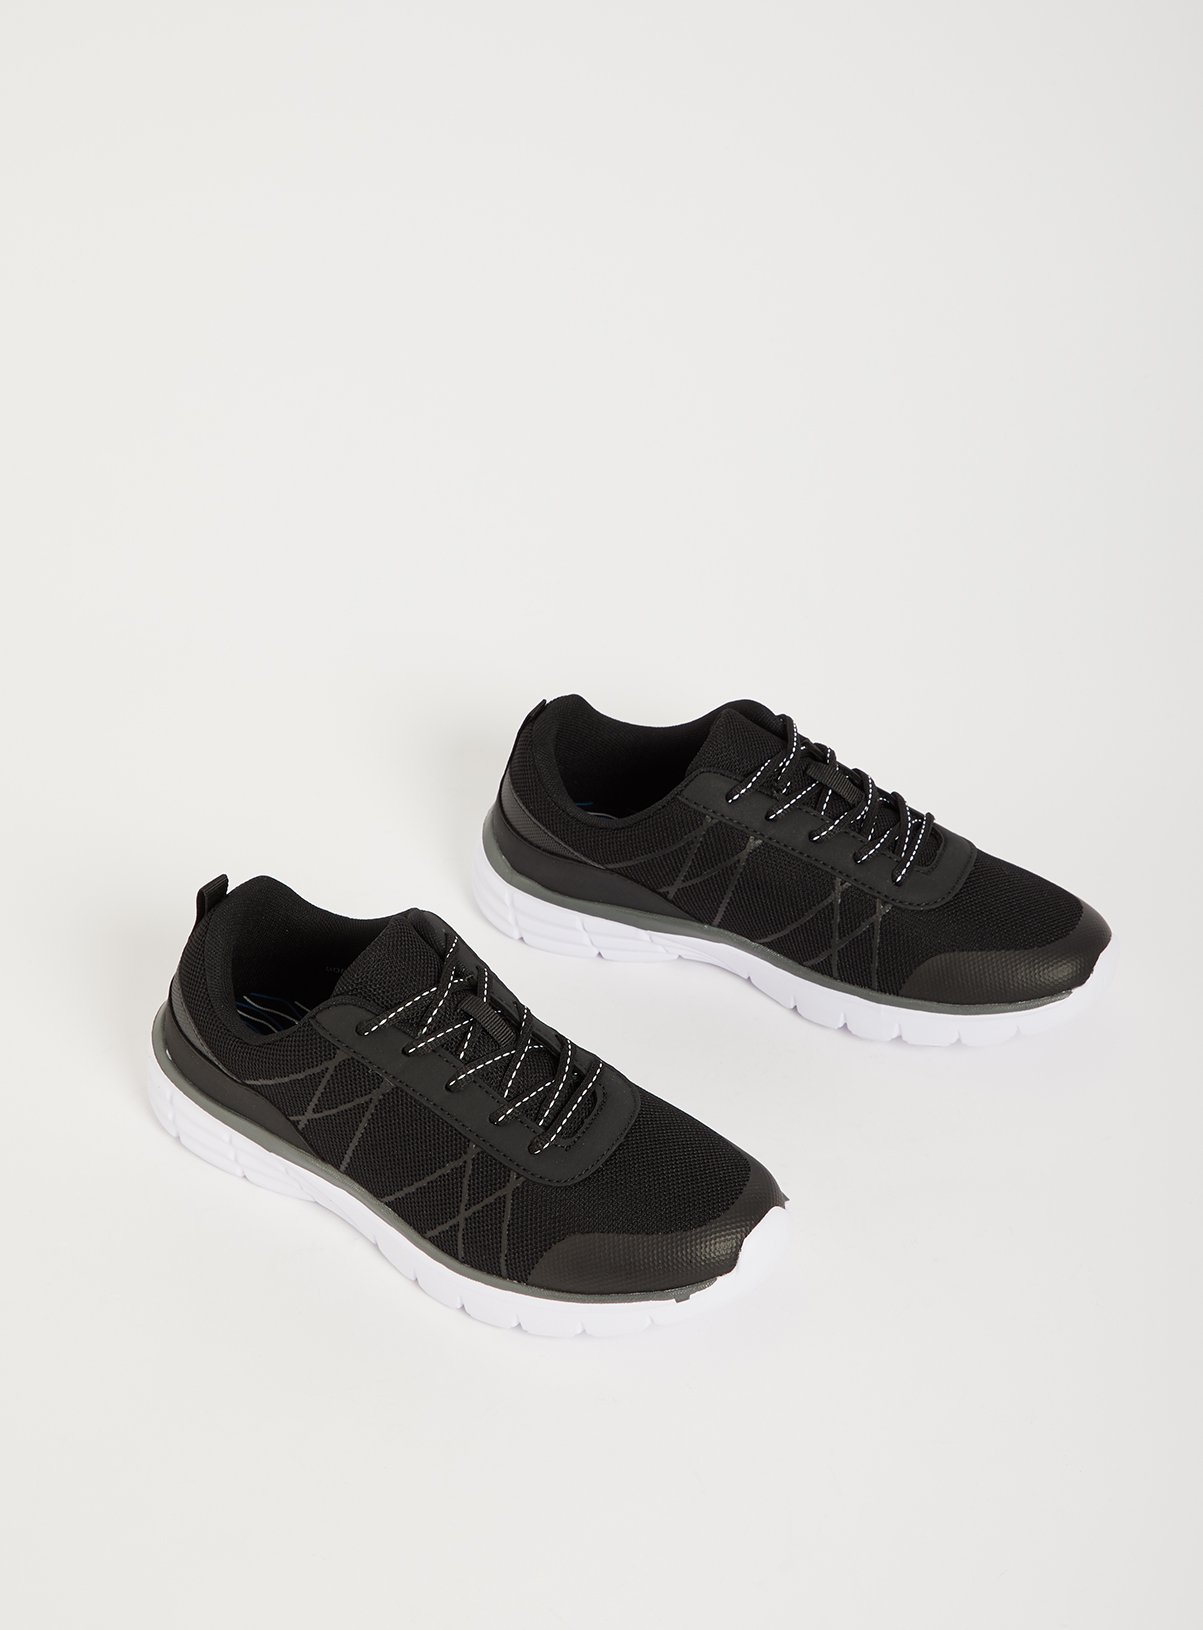 Buy Black Active Lace Up Trainers - 7 